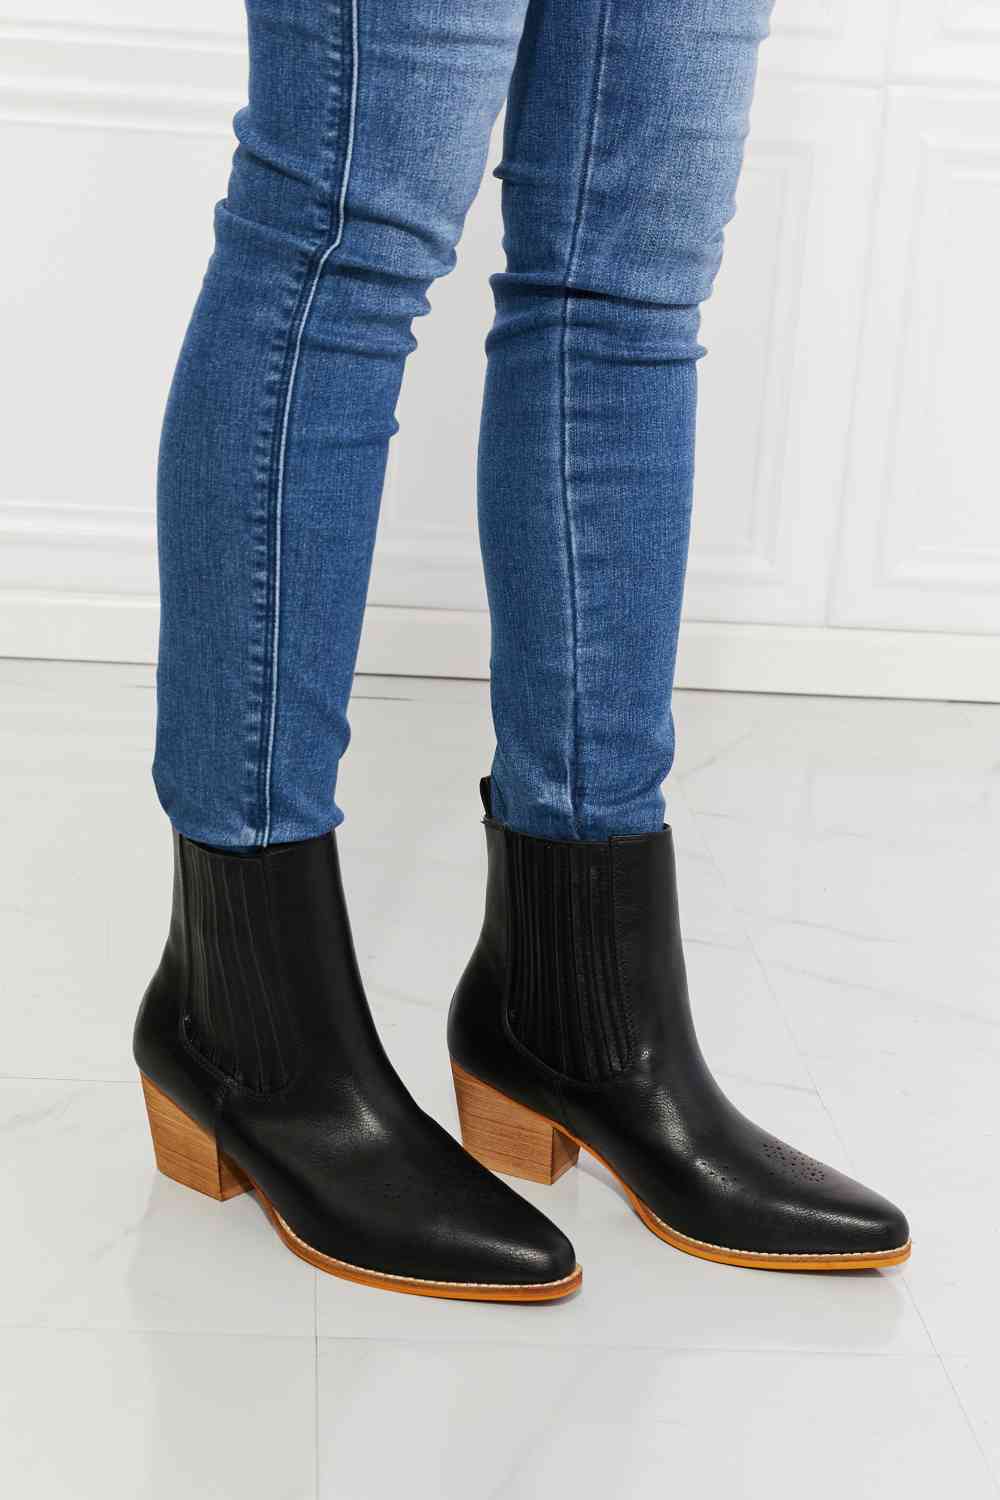 MMShoes Love the Journey Stacked Heel Chelsea Boot in Black - Alonna's Legging Land